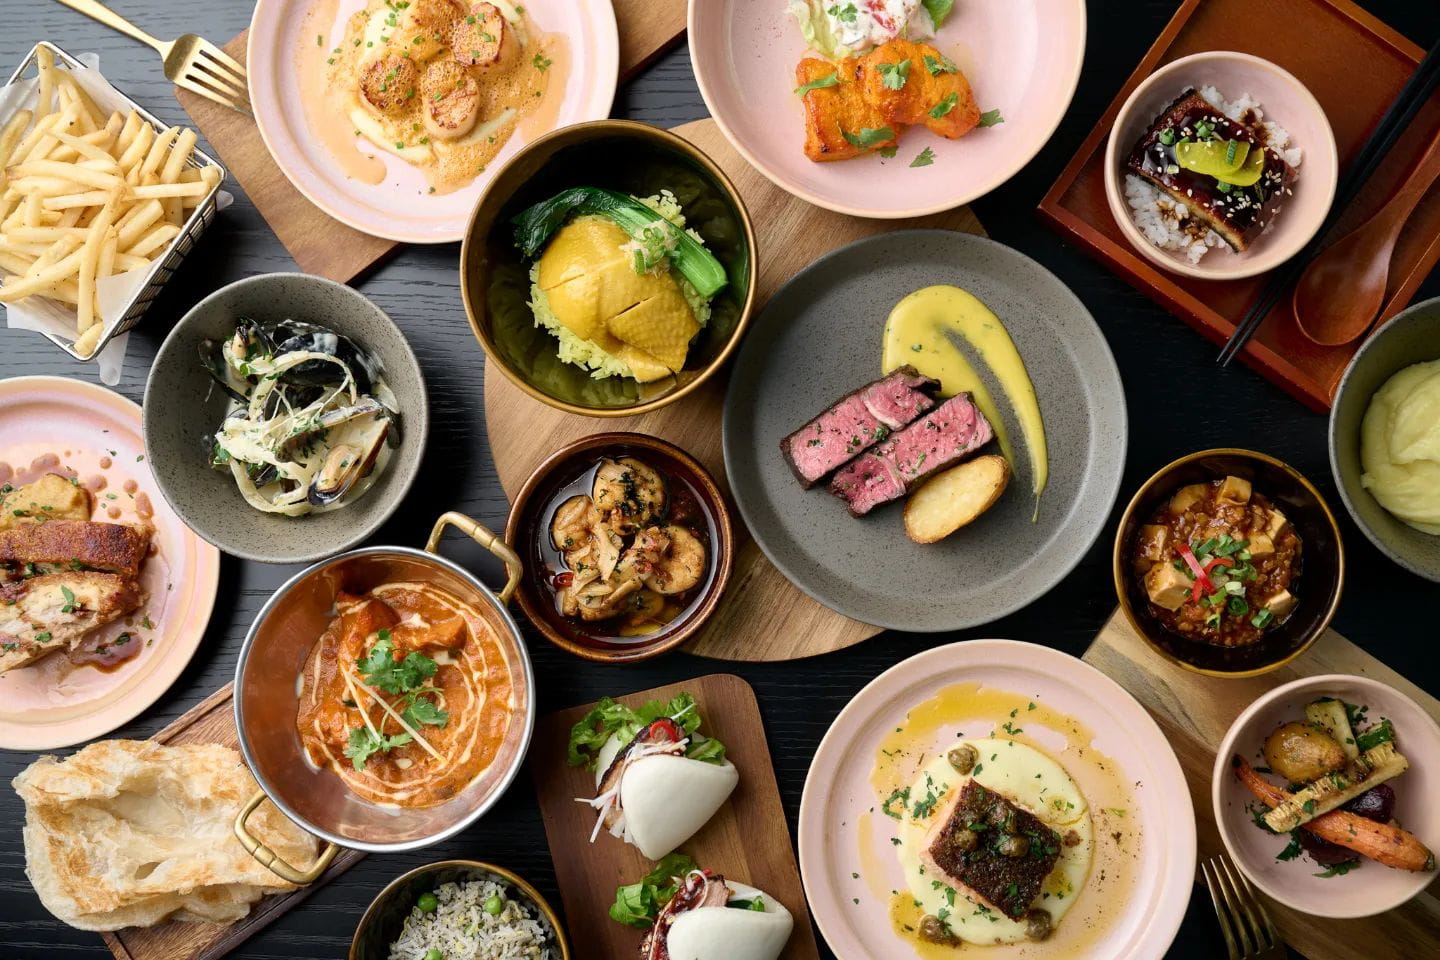 Immerse in the foodie wonderland at FEAST (Food by EAST) with the new buffet items to whet your appetite!

For reservations, please visit link in bio

#atEAST #EASTHongKong #EatatEAST #FEAST